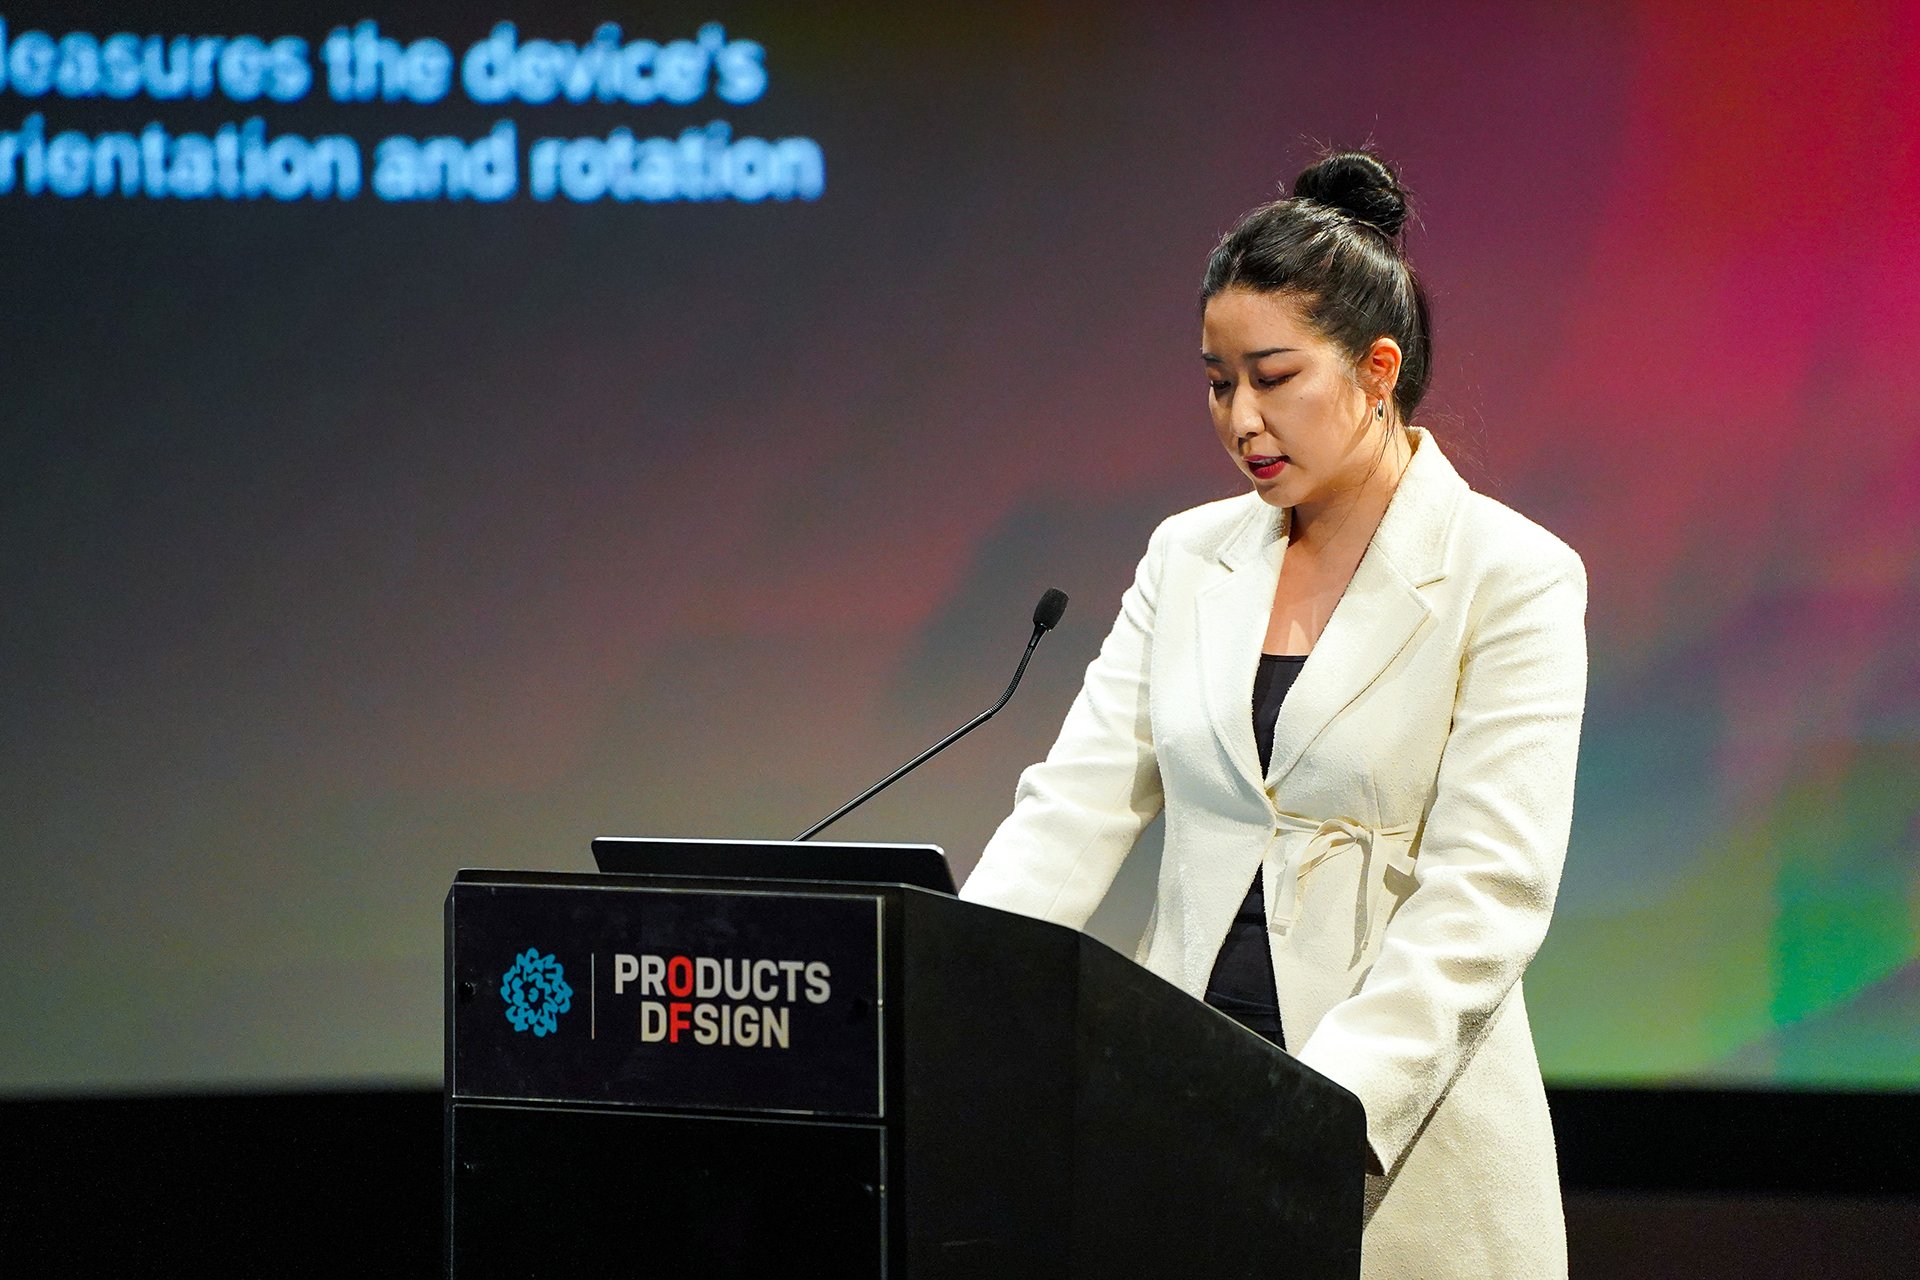  Speaker at podium with screen behind her with text 